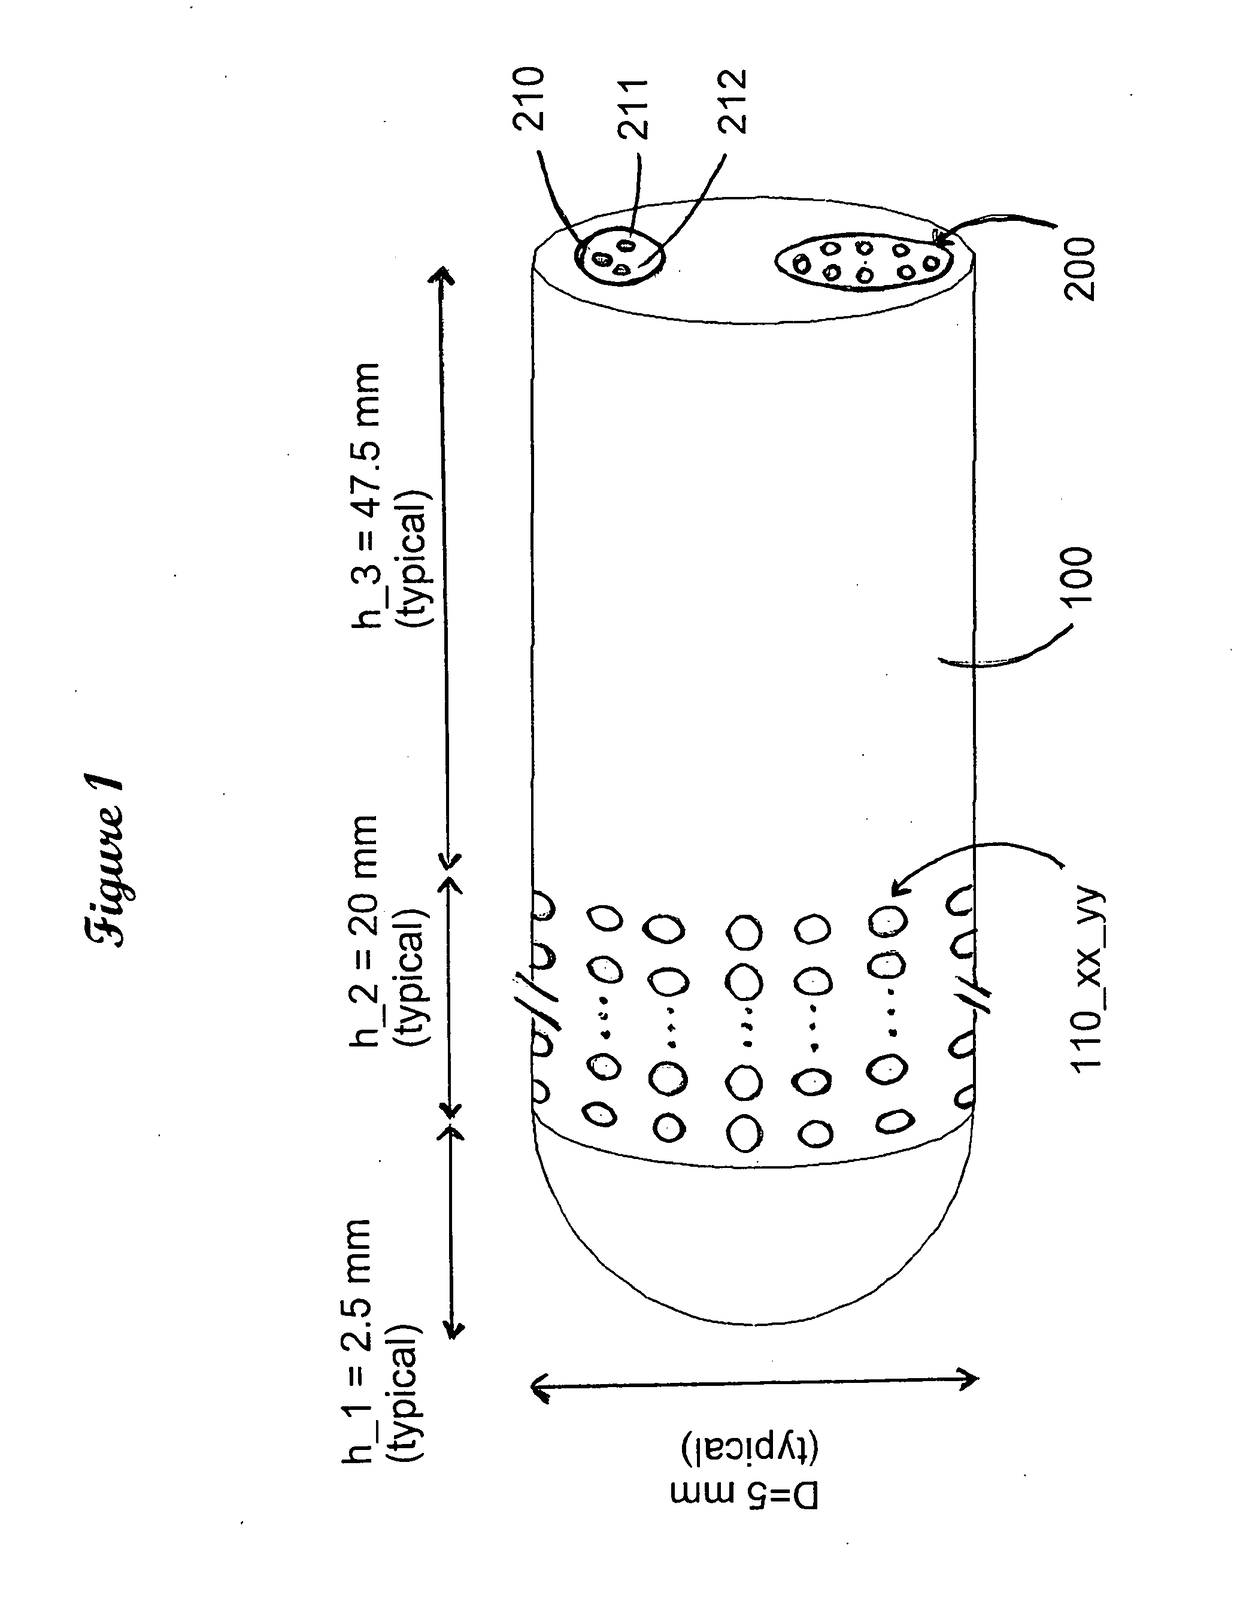 Multiple electrodes and connecting wires for neural and muscular stimulation and measurement device